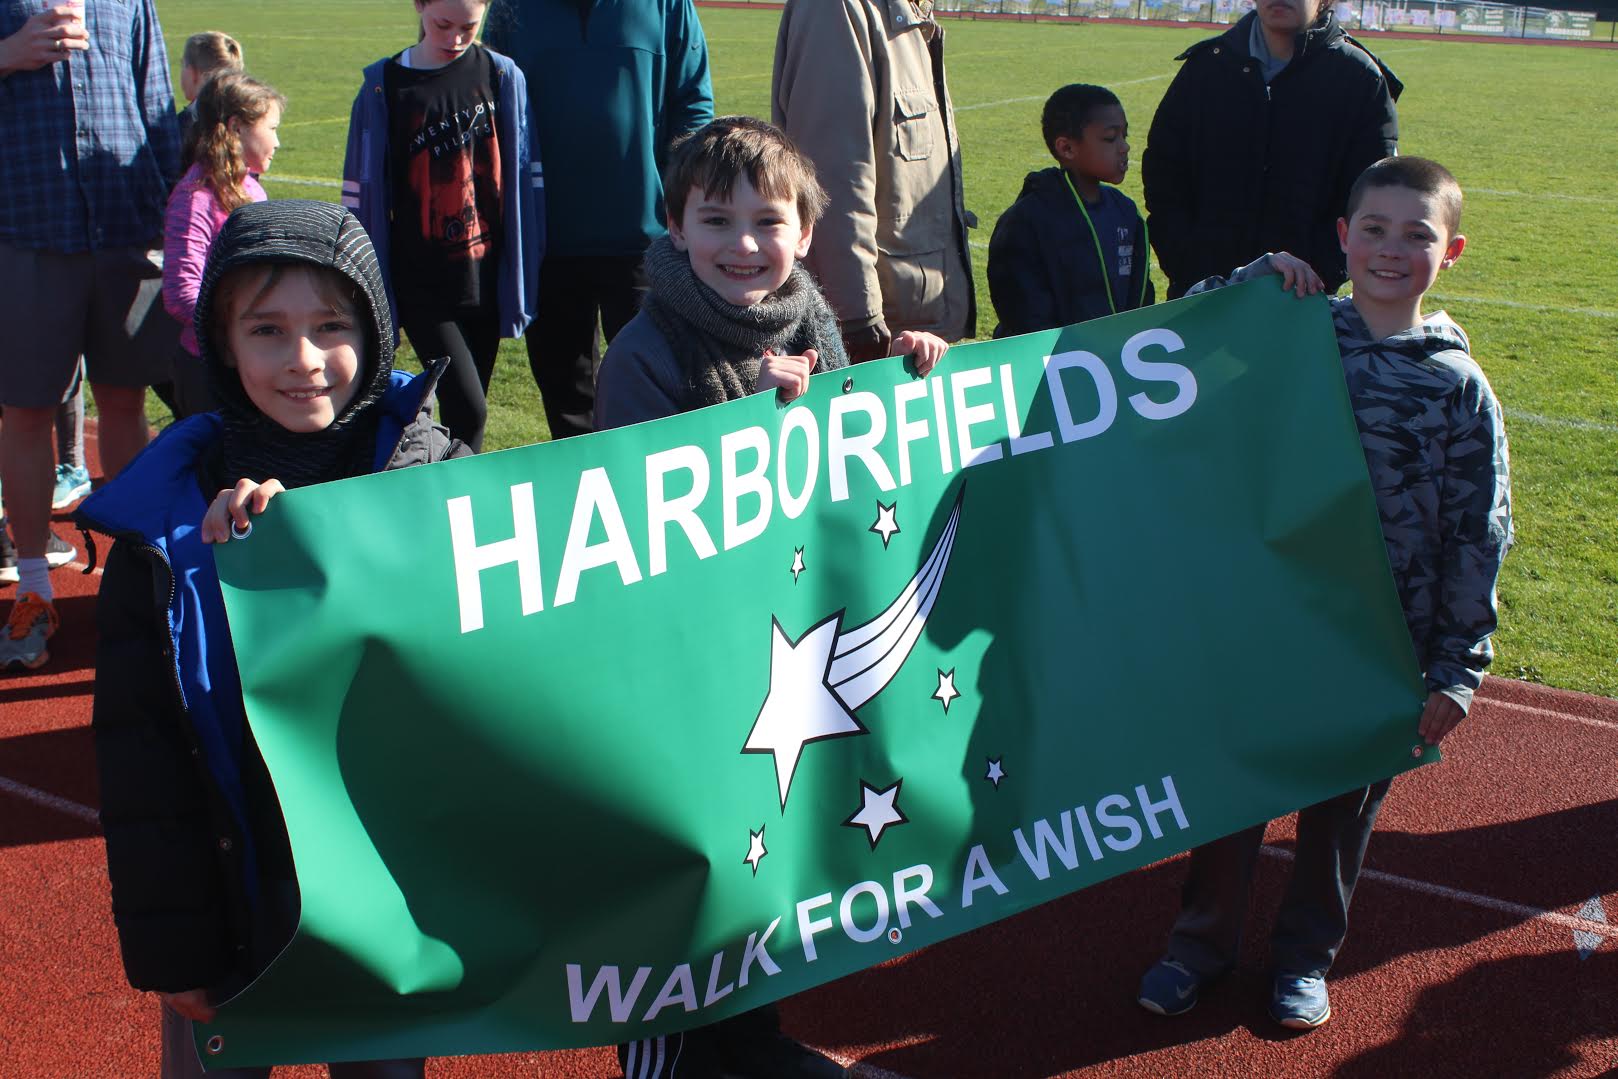 Harborfields community comes together to grant wishes Team Up 4 Community